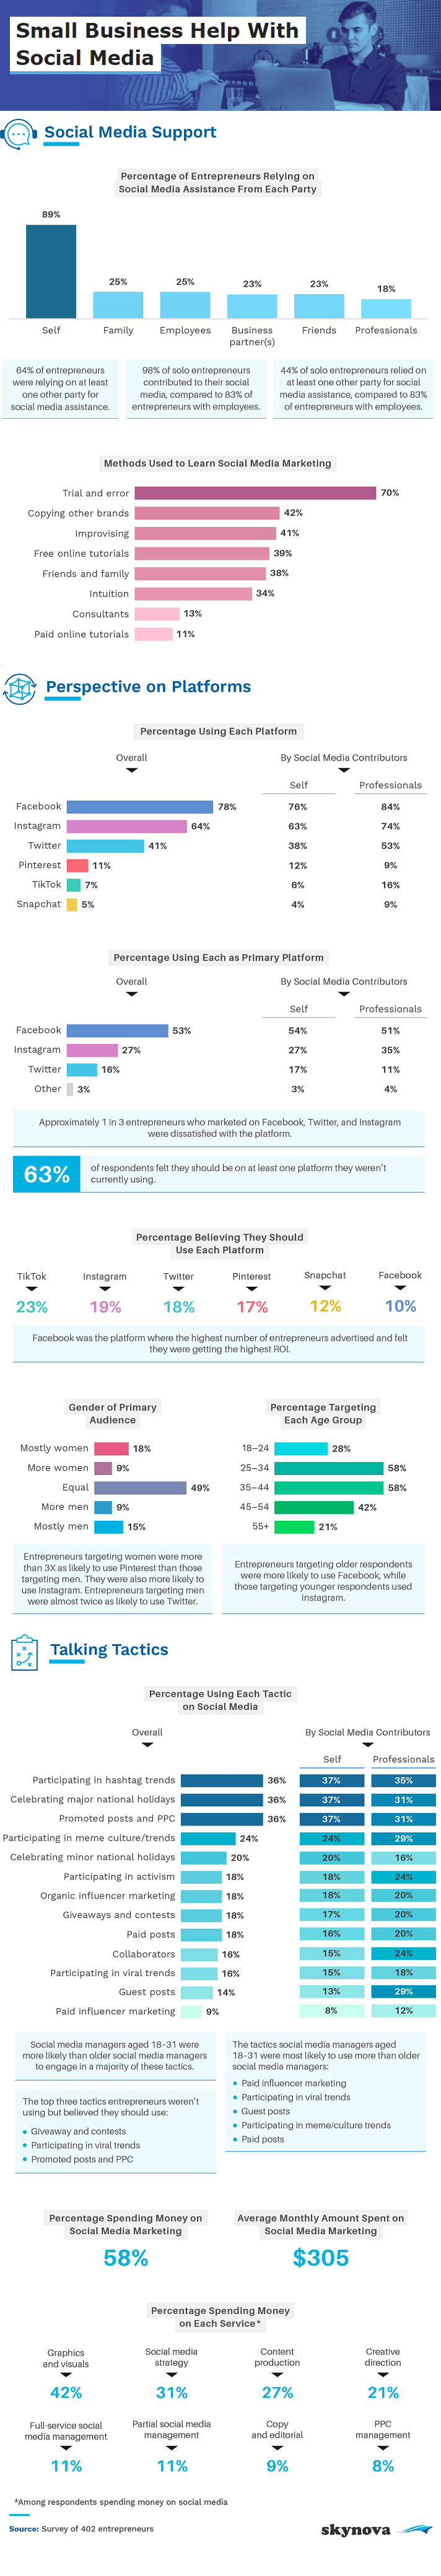 how smbs are tackling social media marketing infographic